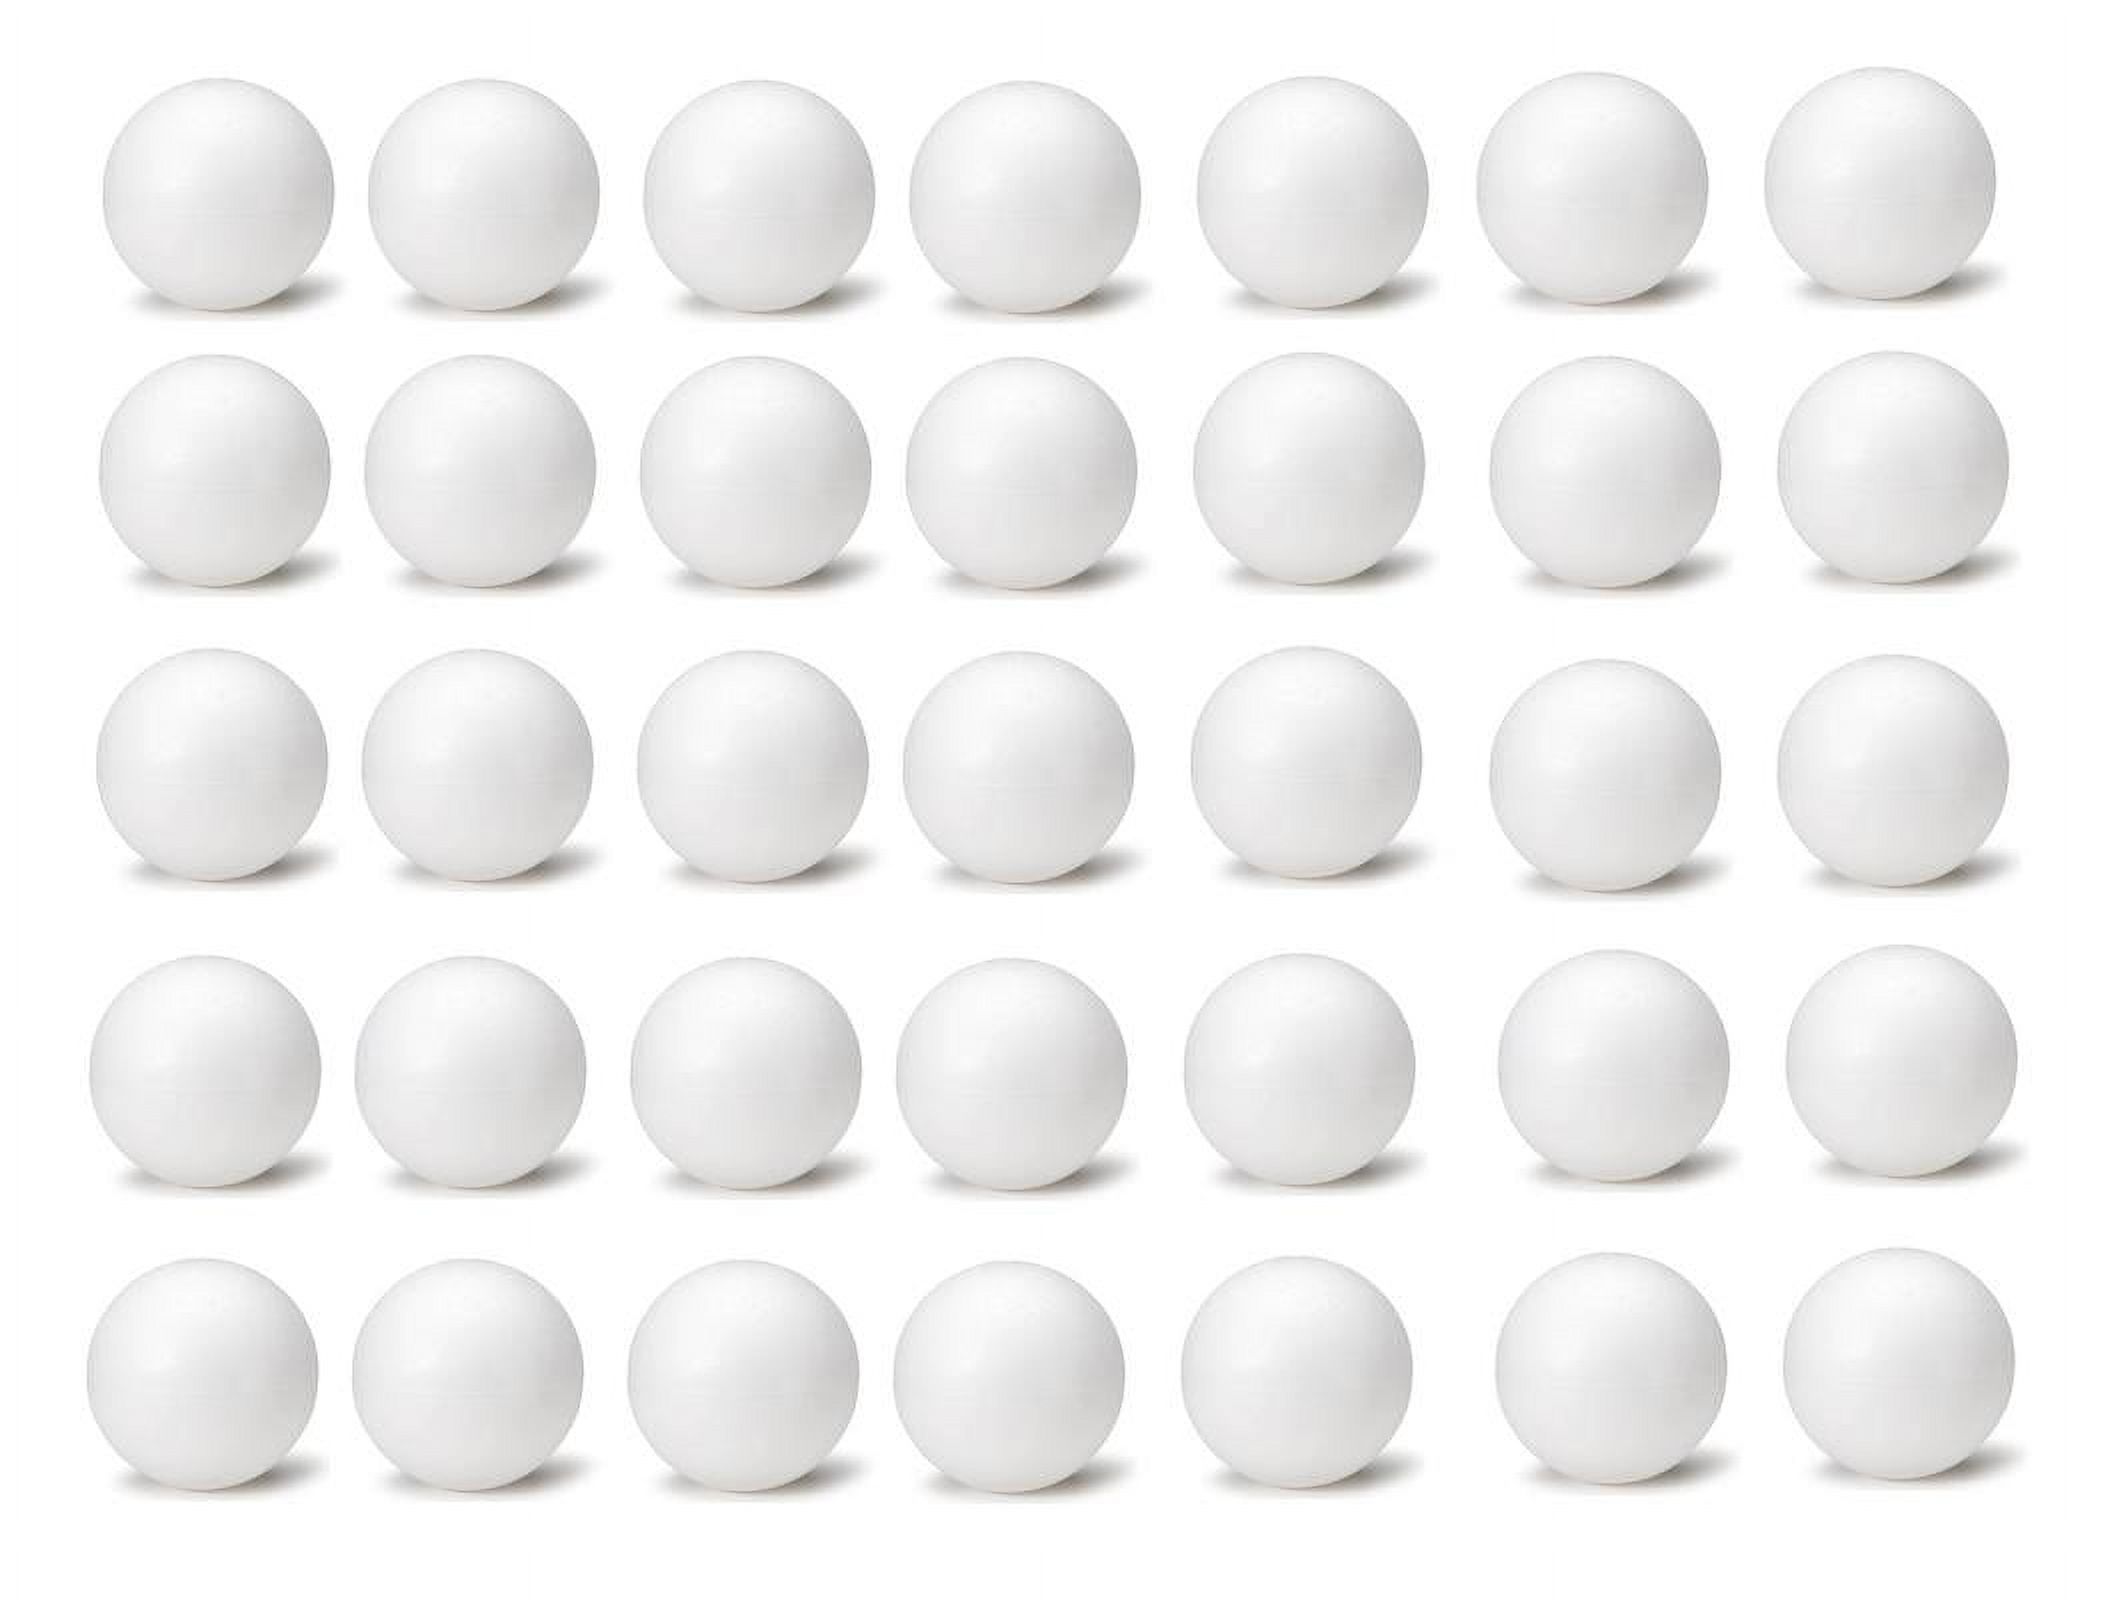 3 Inch Foam Ball Polystyrene Balls for Art & Crafts Projects 